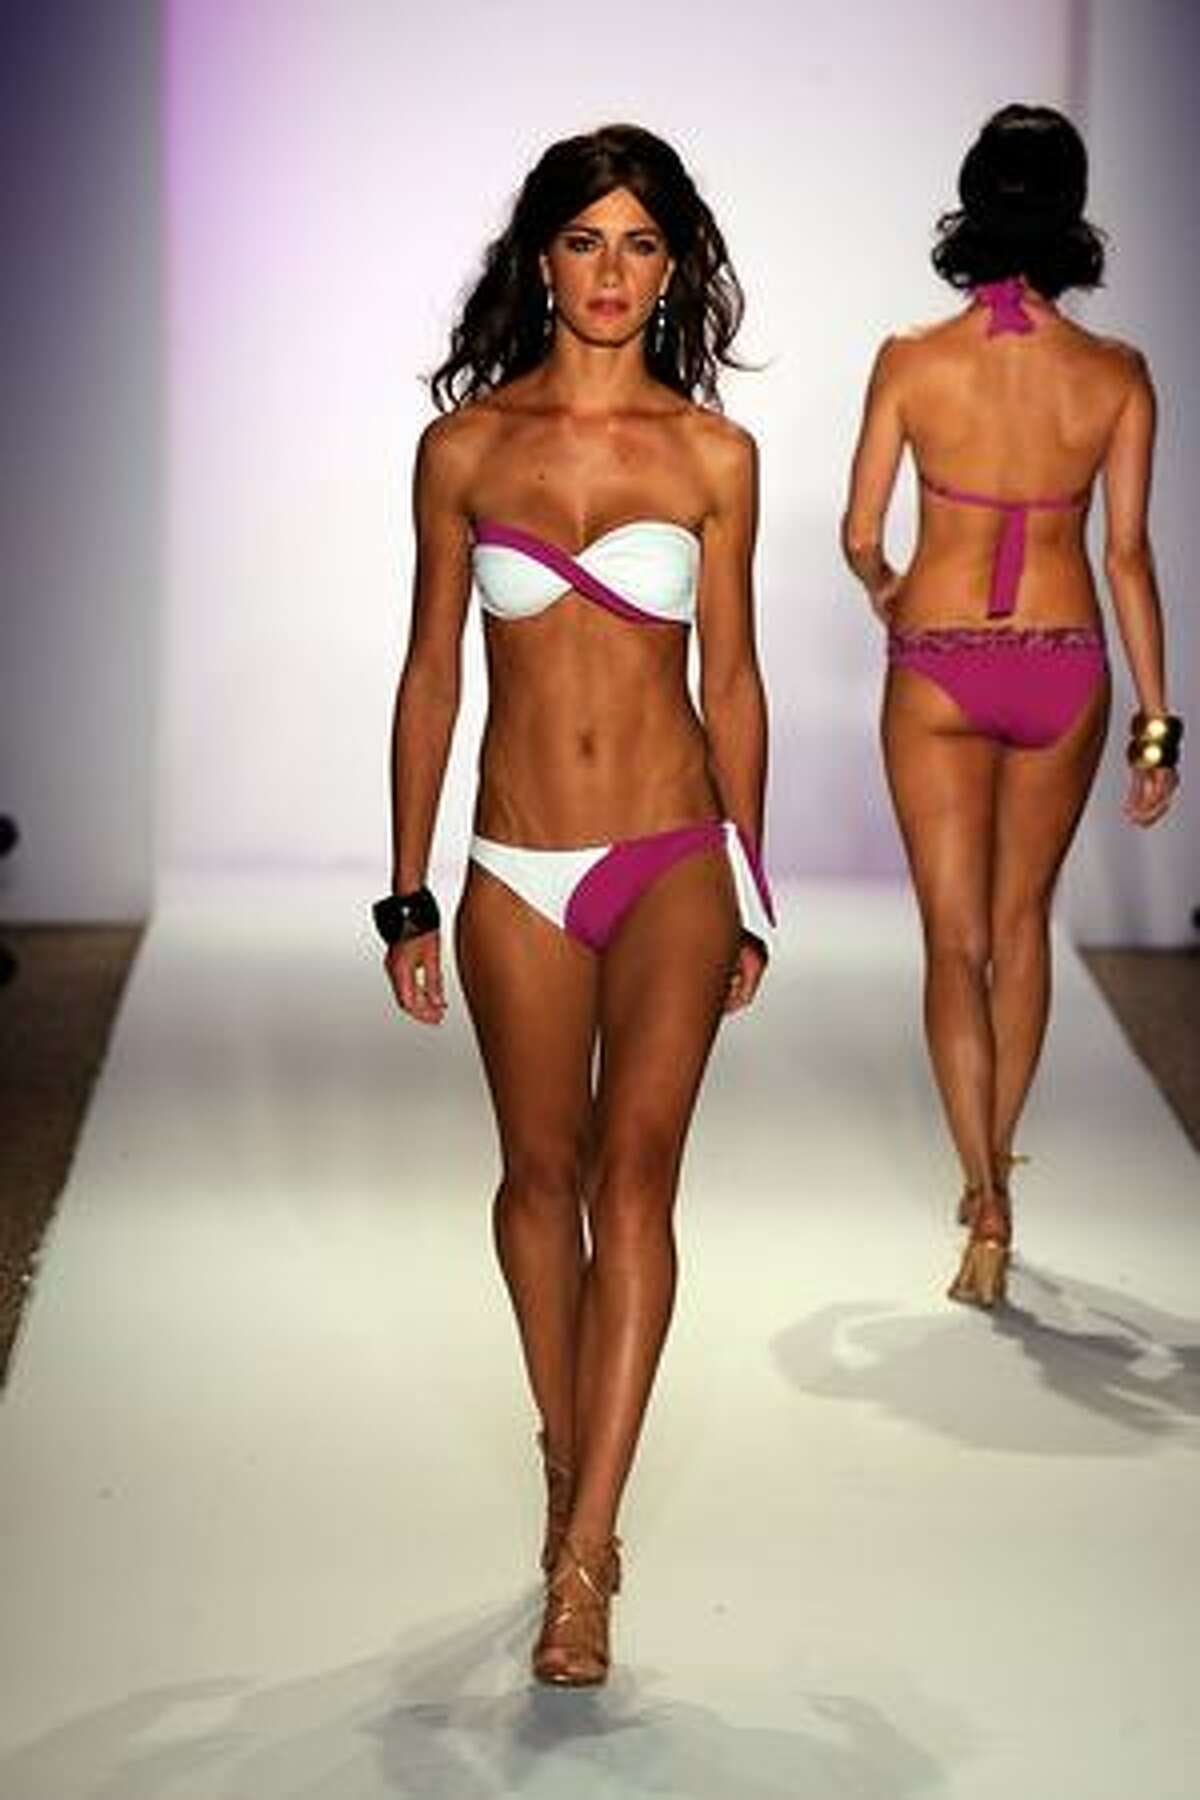 MIAMI BEACH, FL - JULY 17: A model walks the runway at the ANK by Mirla Sabino 2010 fashion show during Mercedes-Benz Fashion Week Swim at the Beachway at The Raleigh on July 17, 2009 in Miami Beach, Florida.